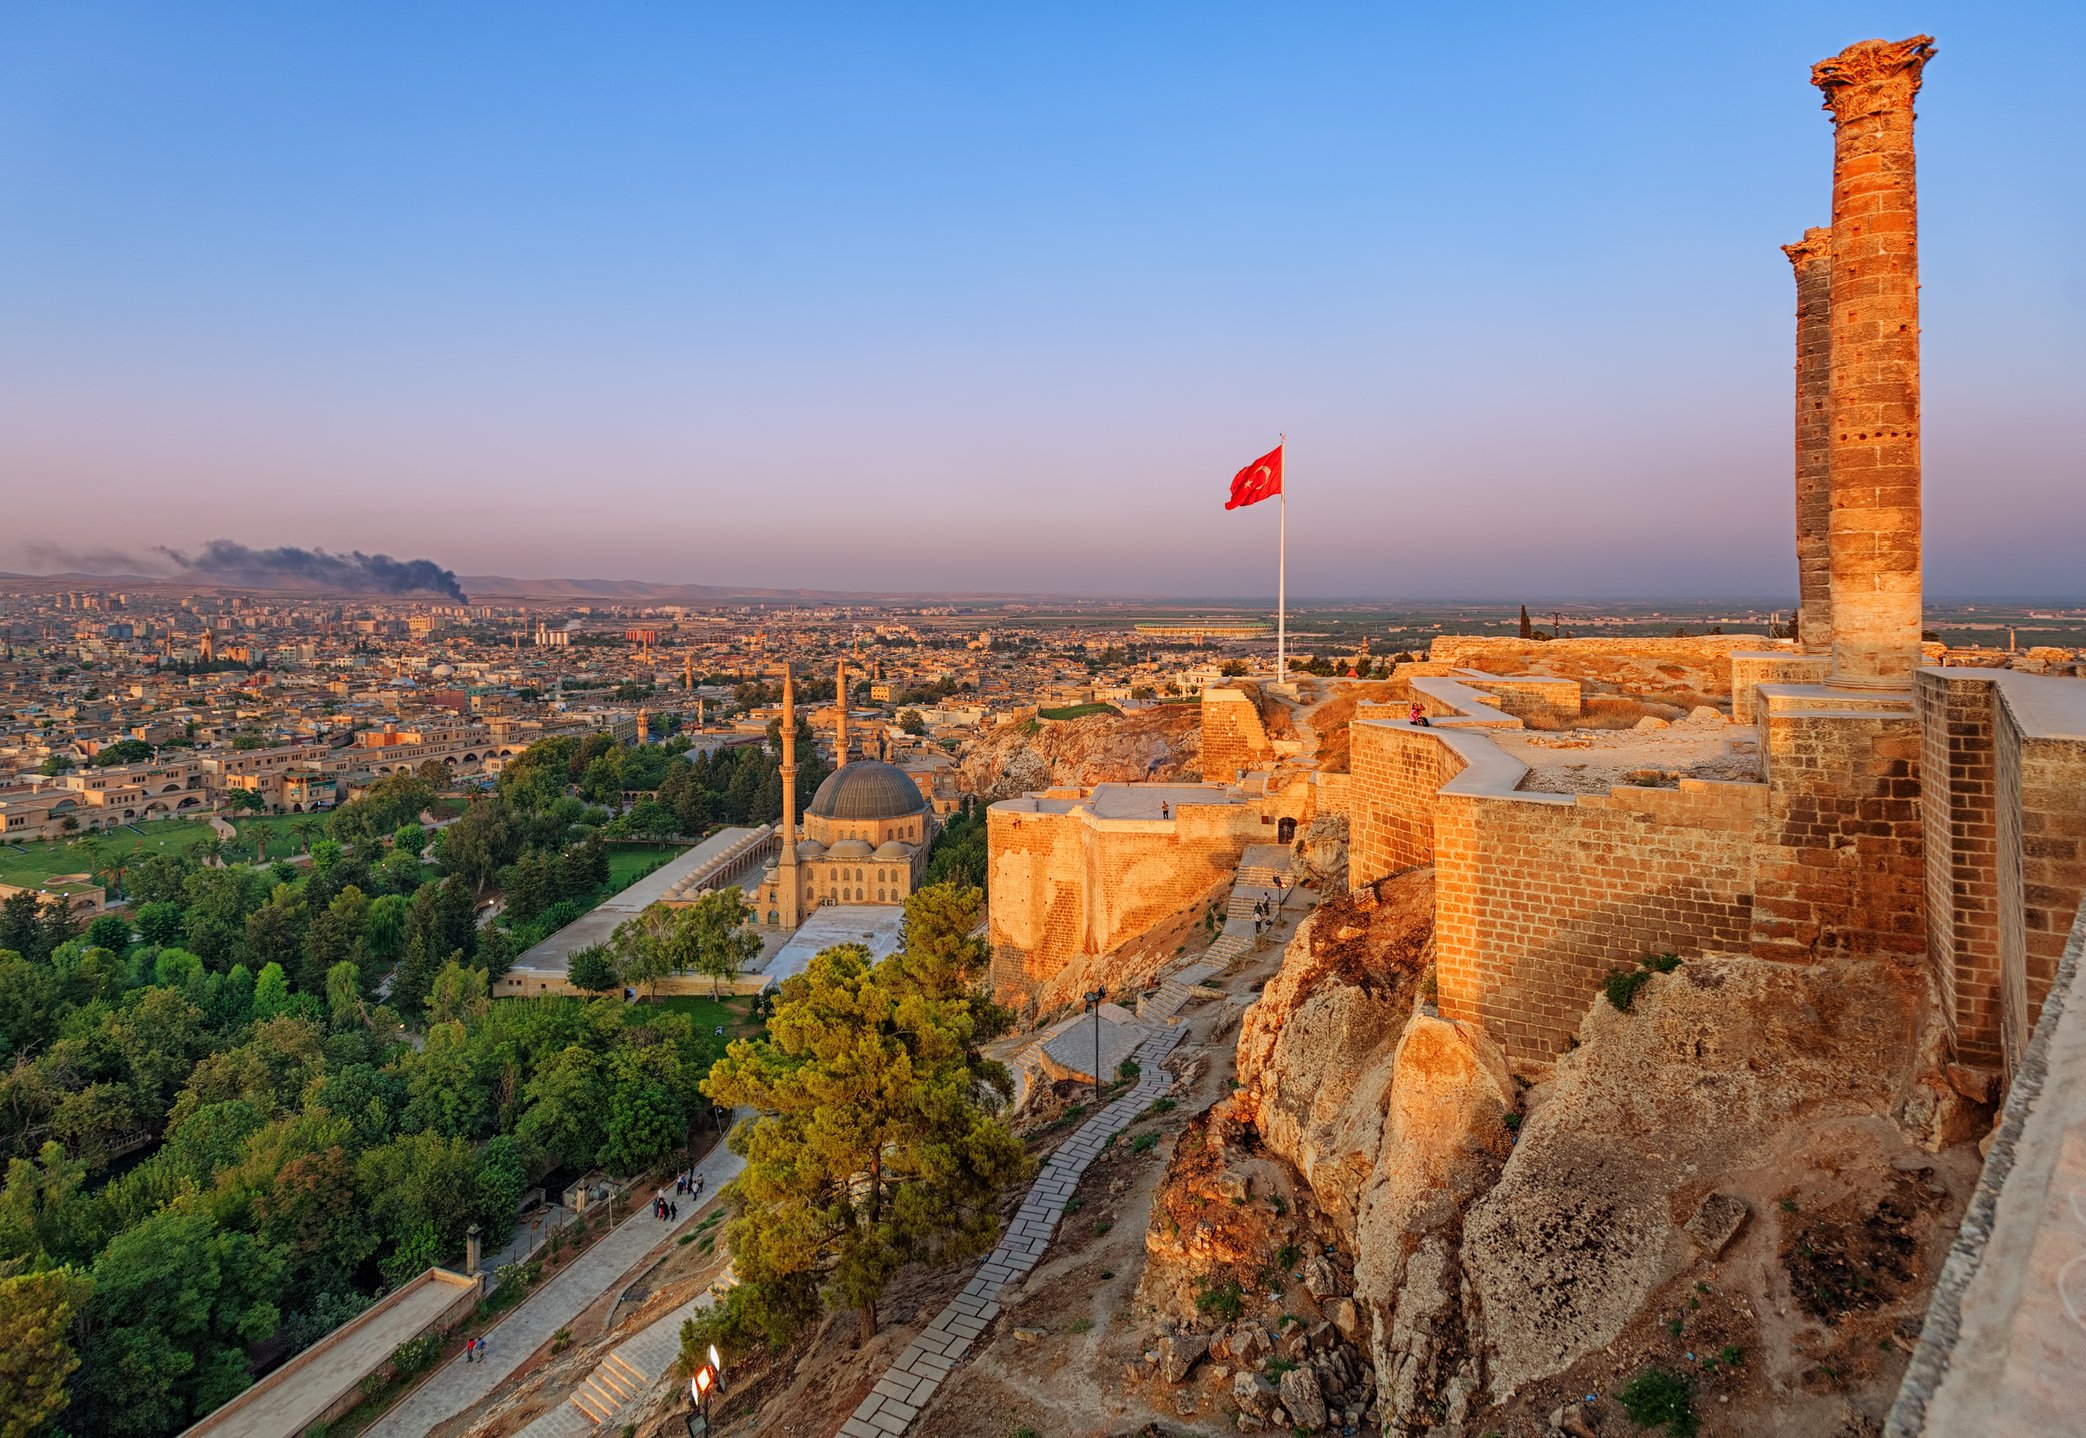 The Castle of Urfa serves as the city